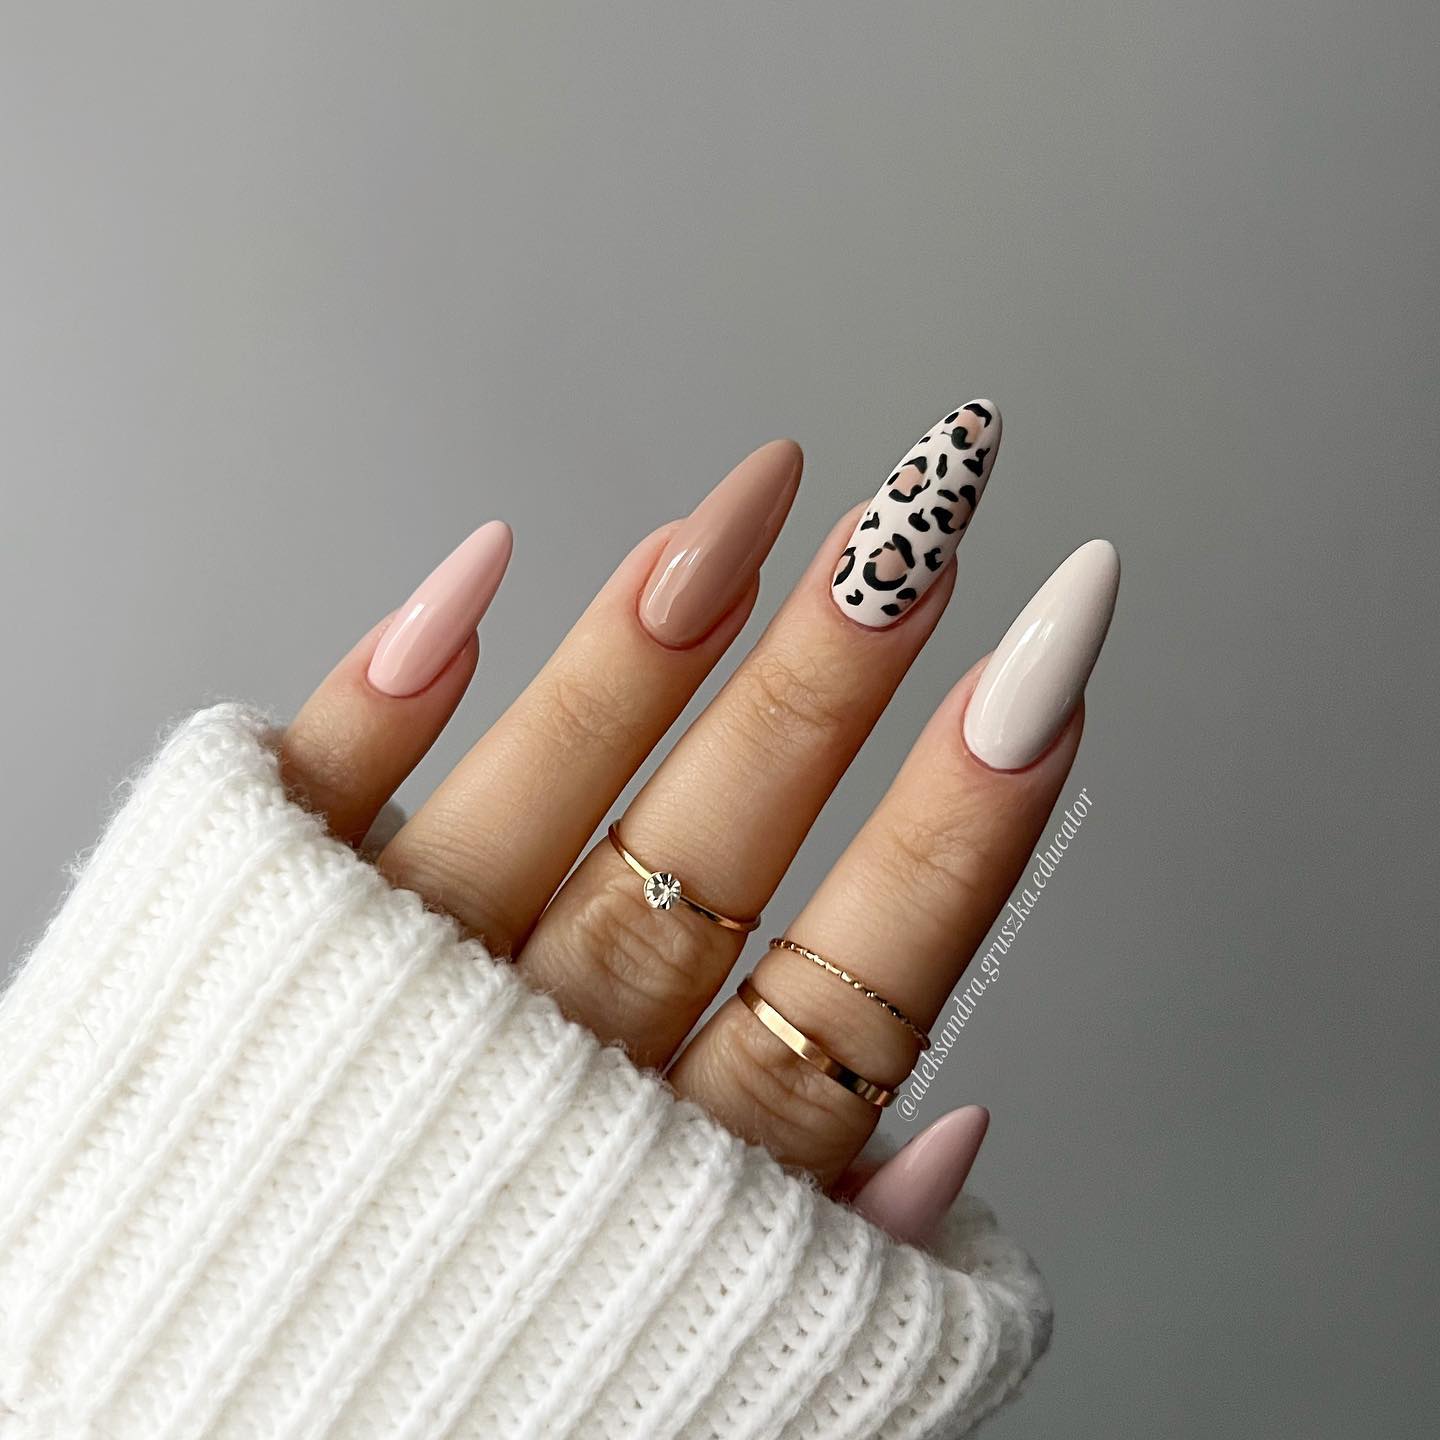 Brown and White Nails with Leopard Print